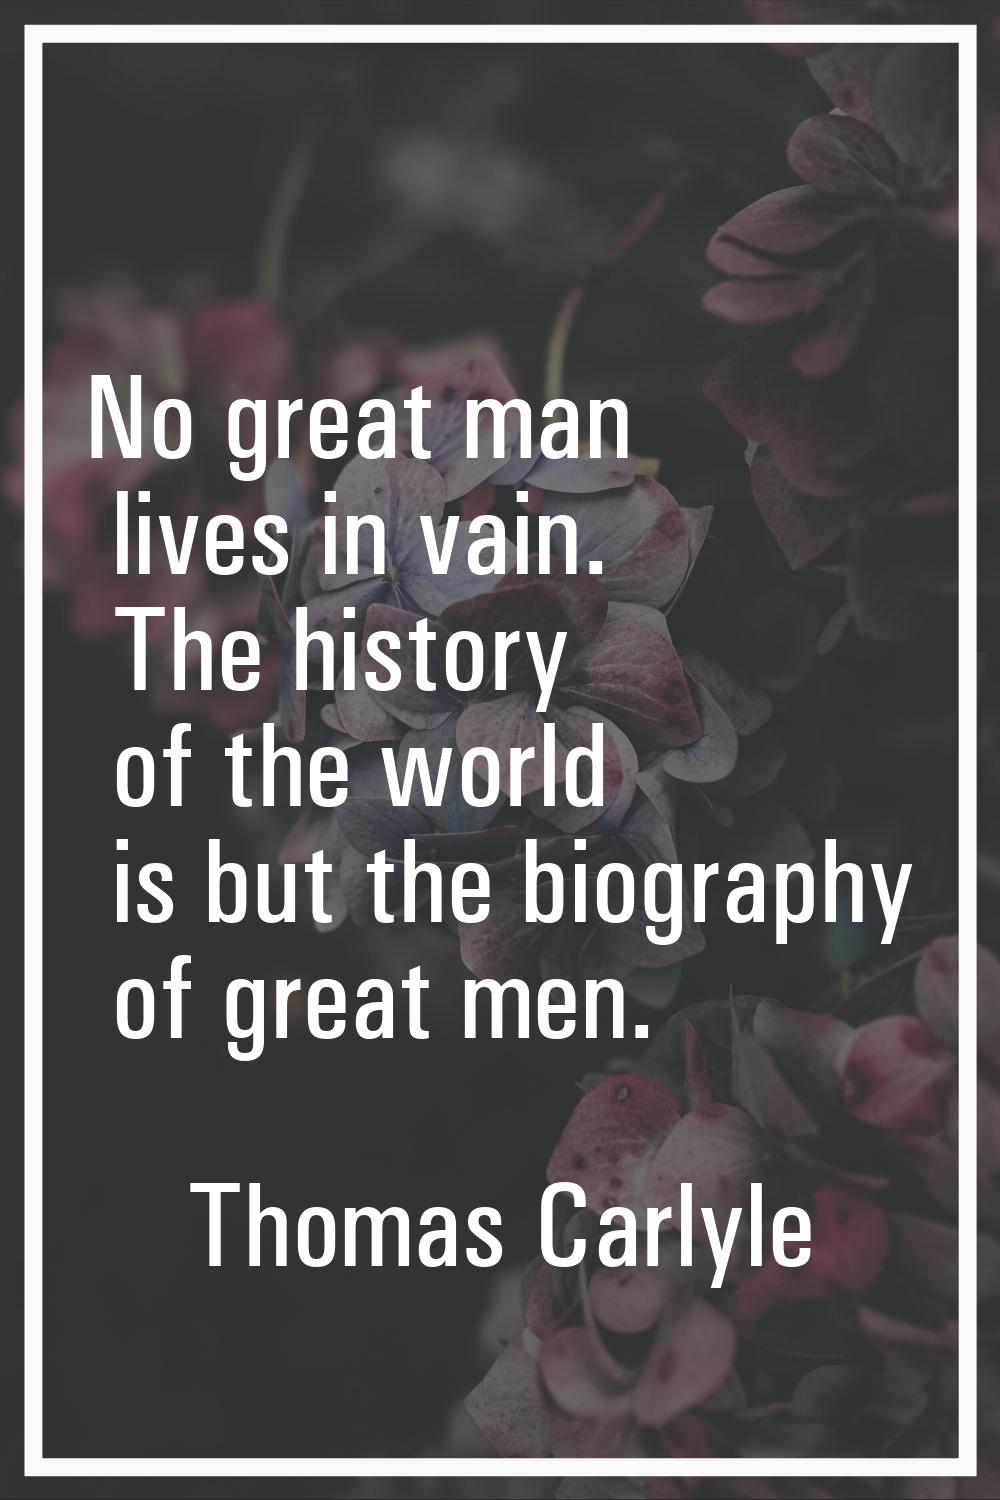 No great man lives in vain. The history of the world is but the biography of great men.